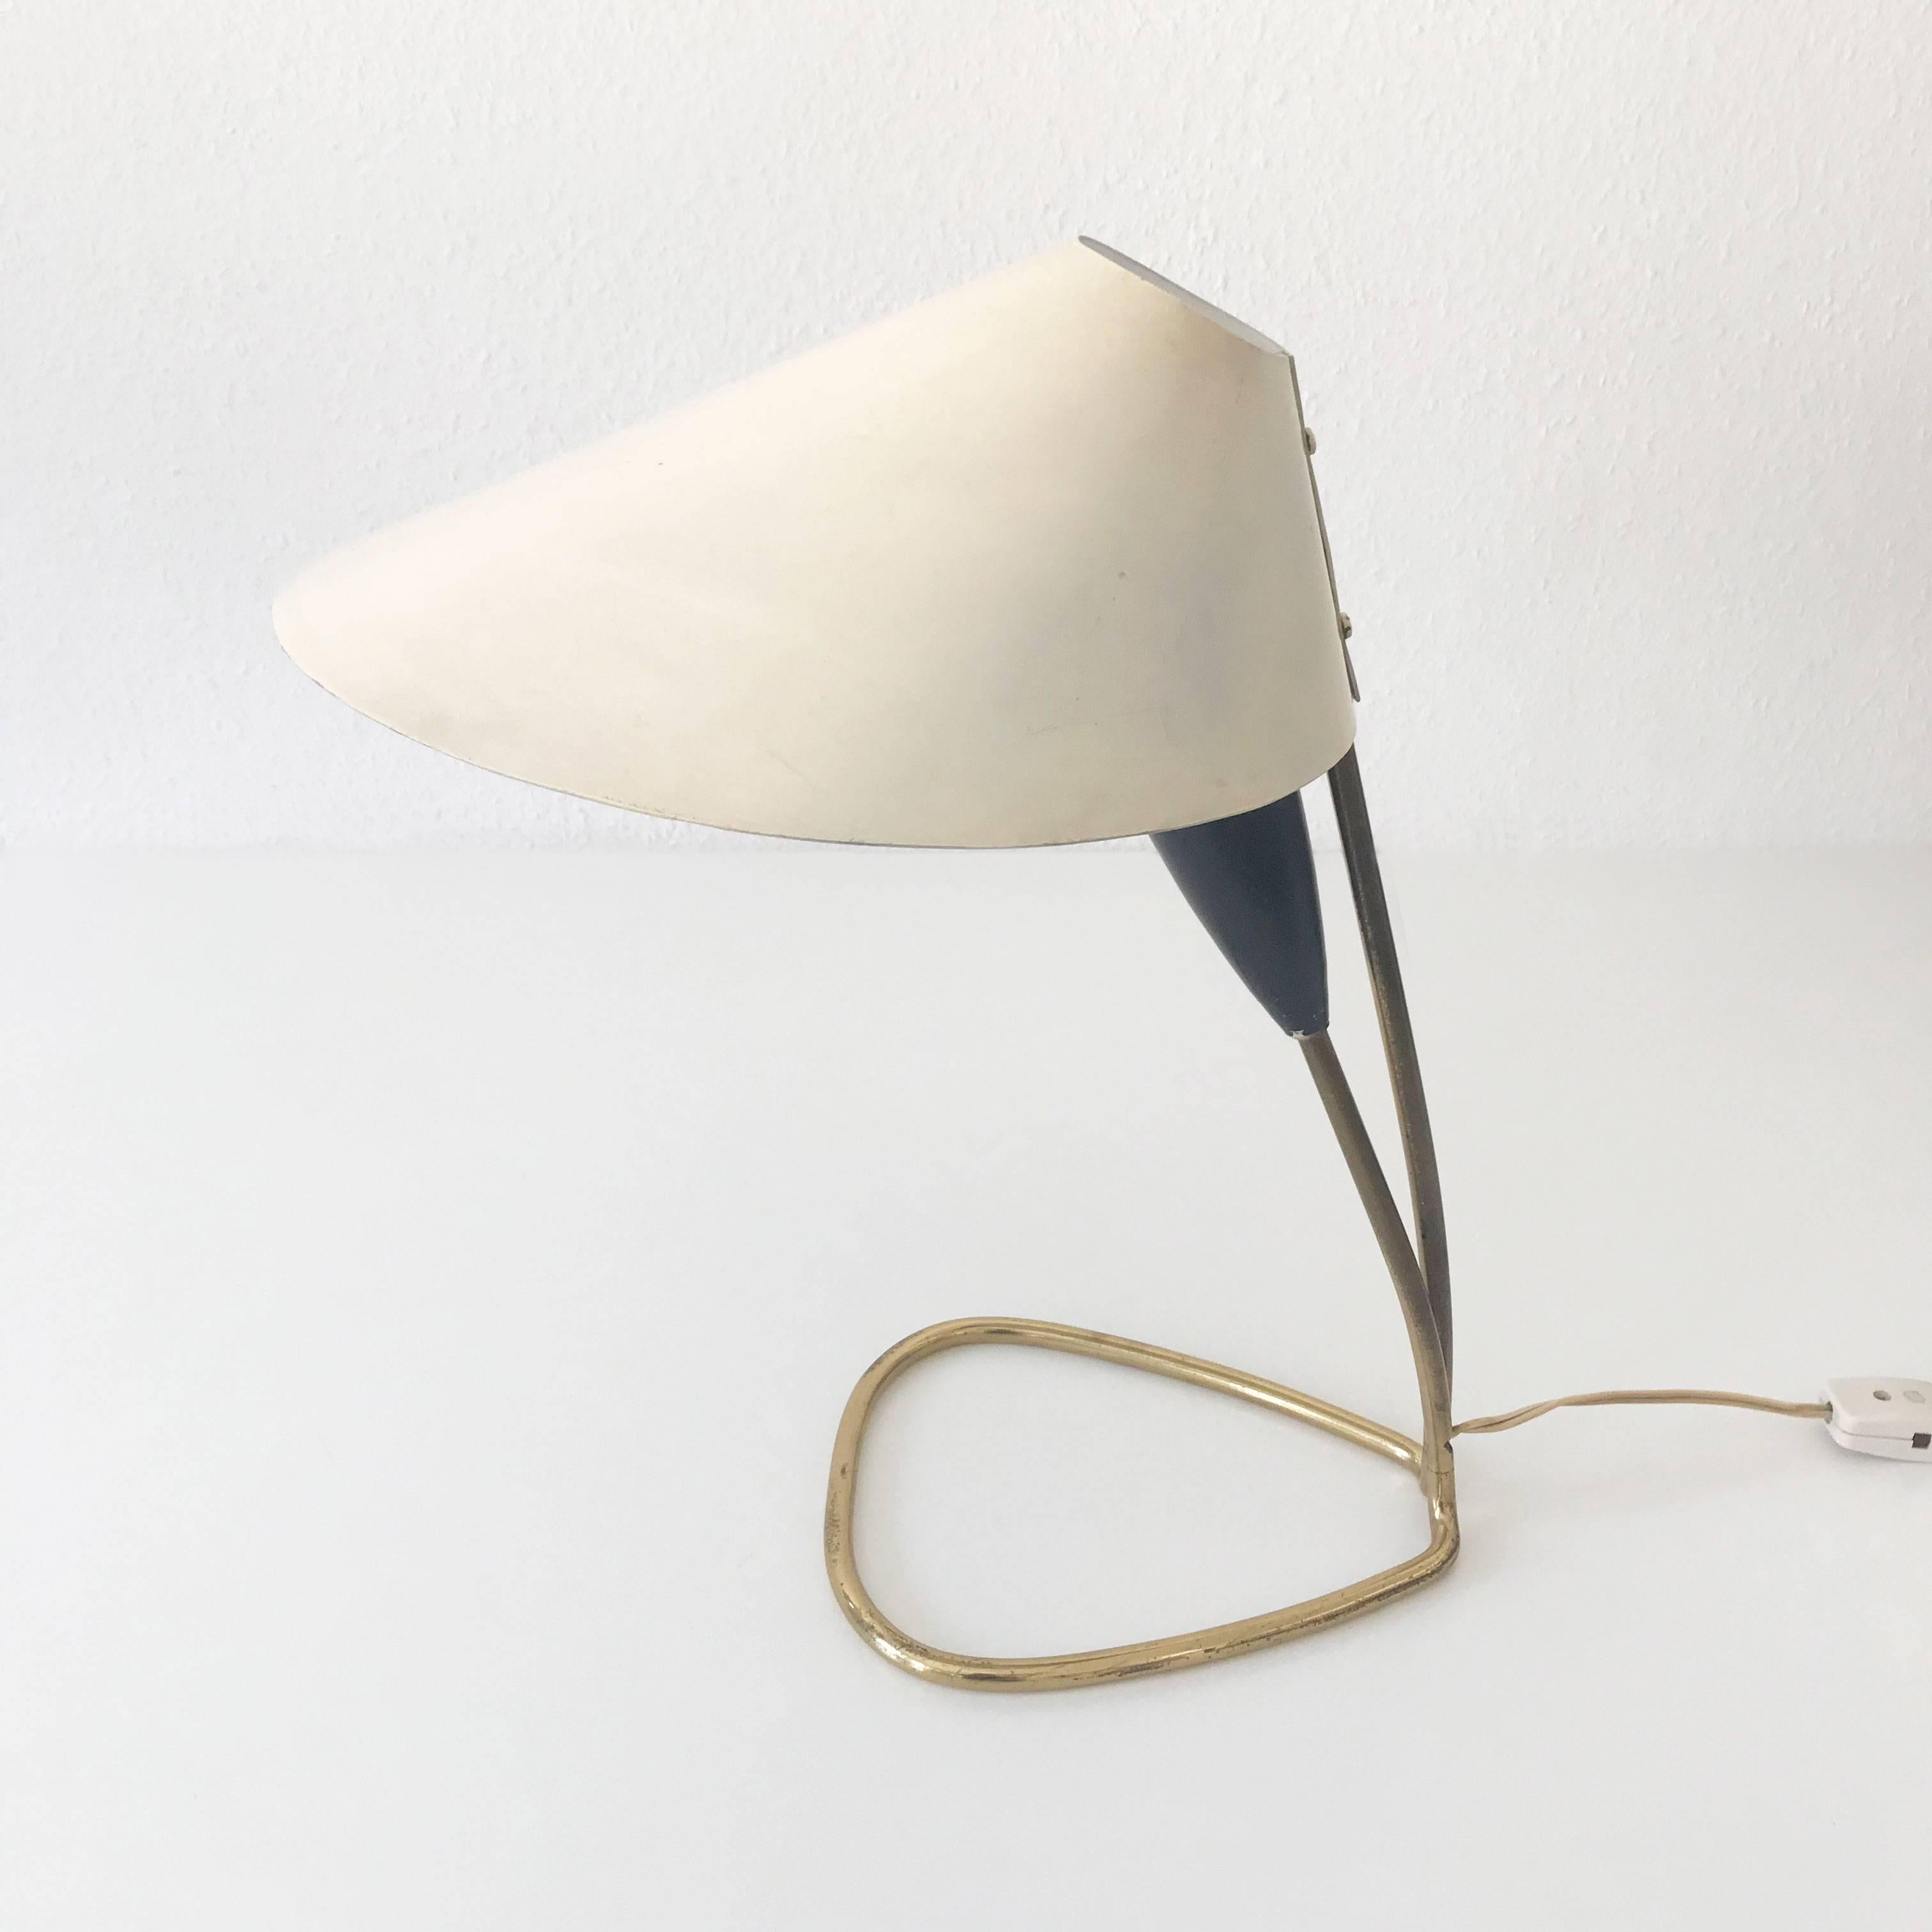 Elegant Mid-Century Modern Table Lamp or Desk Light Italy 1950s In Good Condition For Sale In Munich, DE